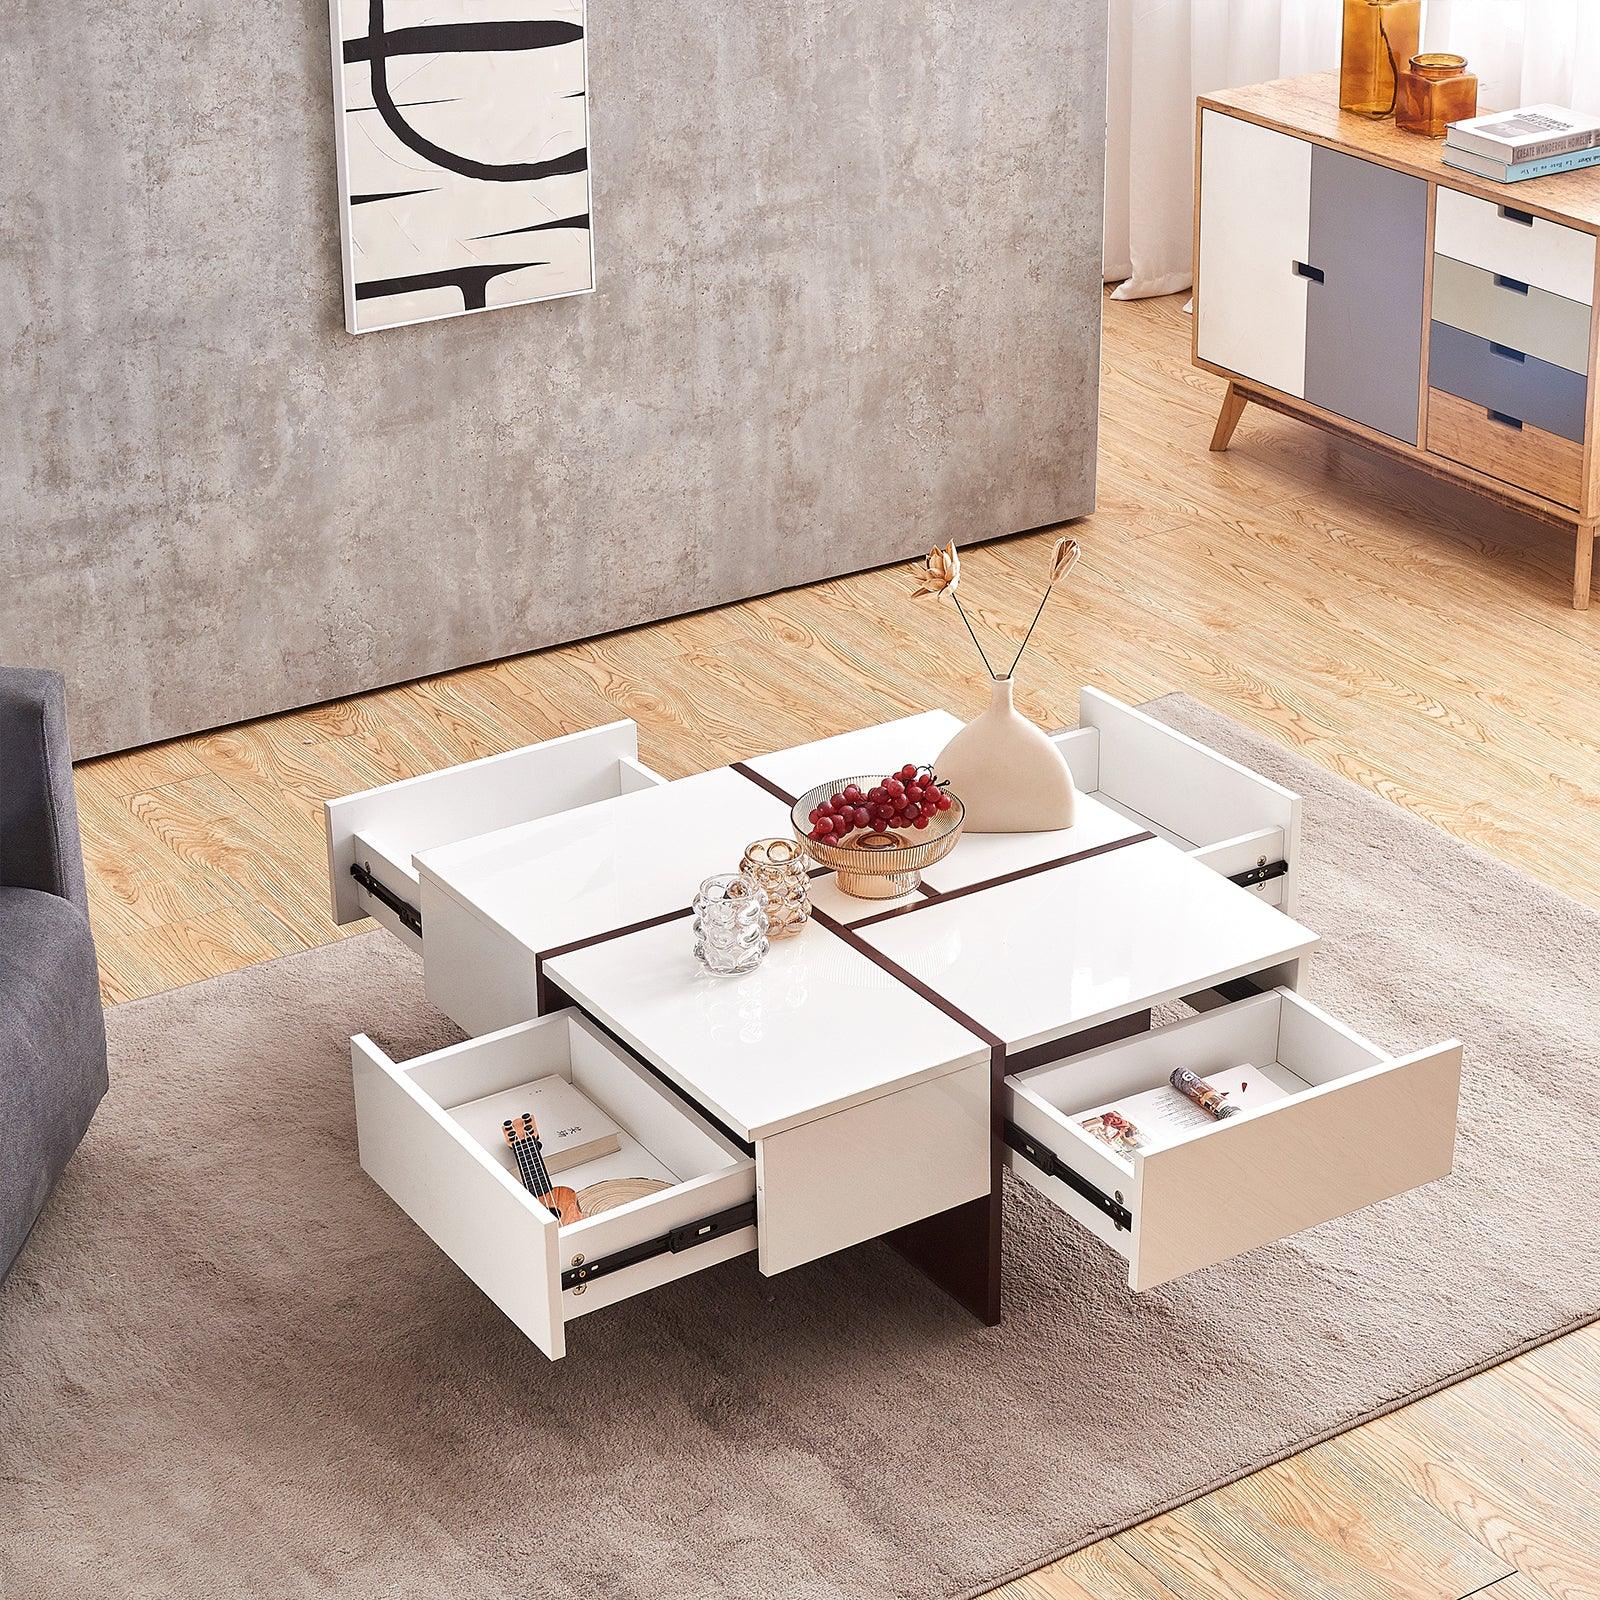 🆓🚛 Modern Style Square Coffee Table With 4 Drawers - White & Walnut, Particle Board